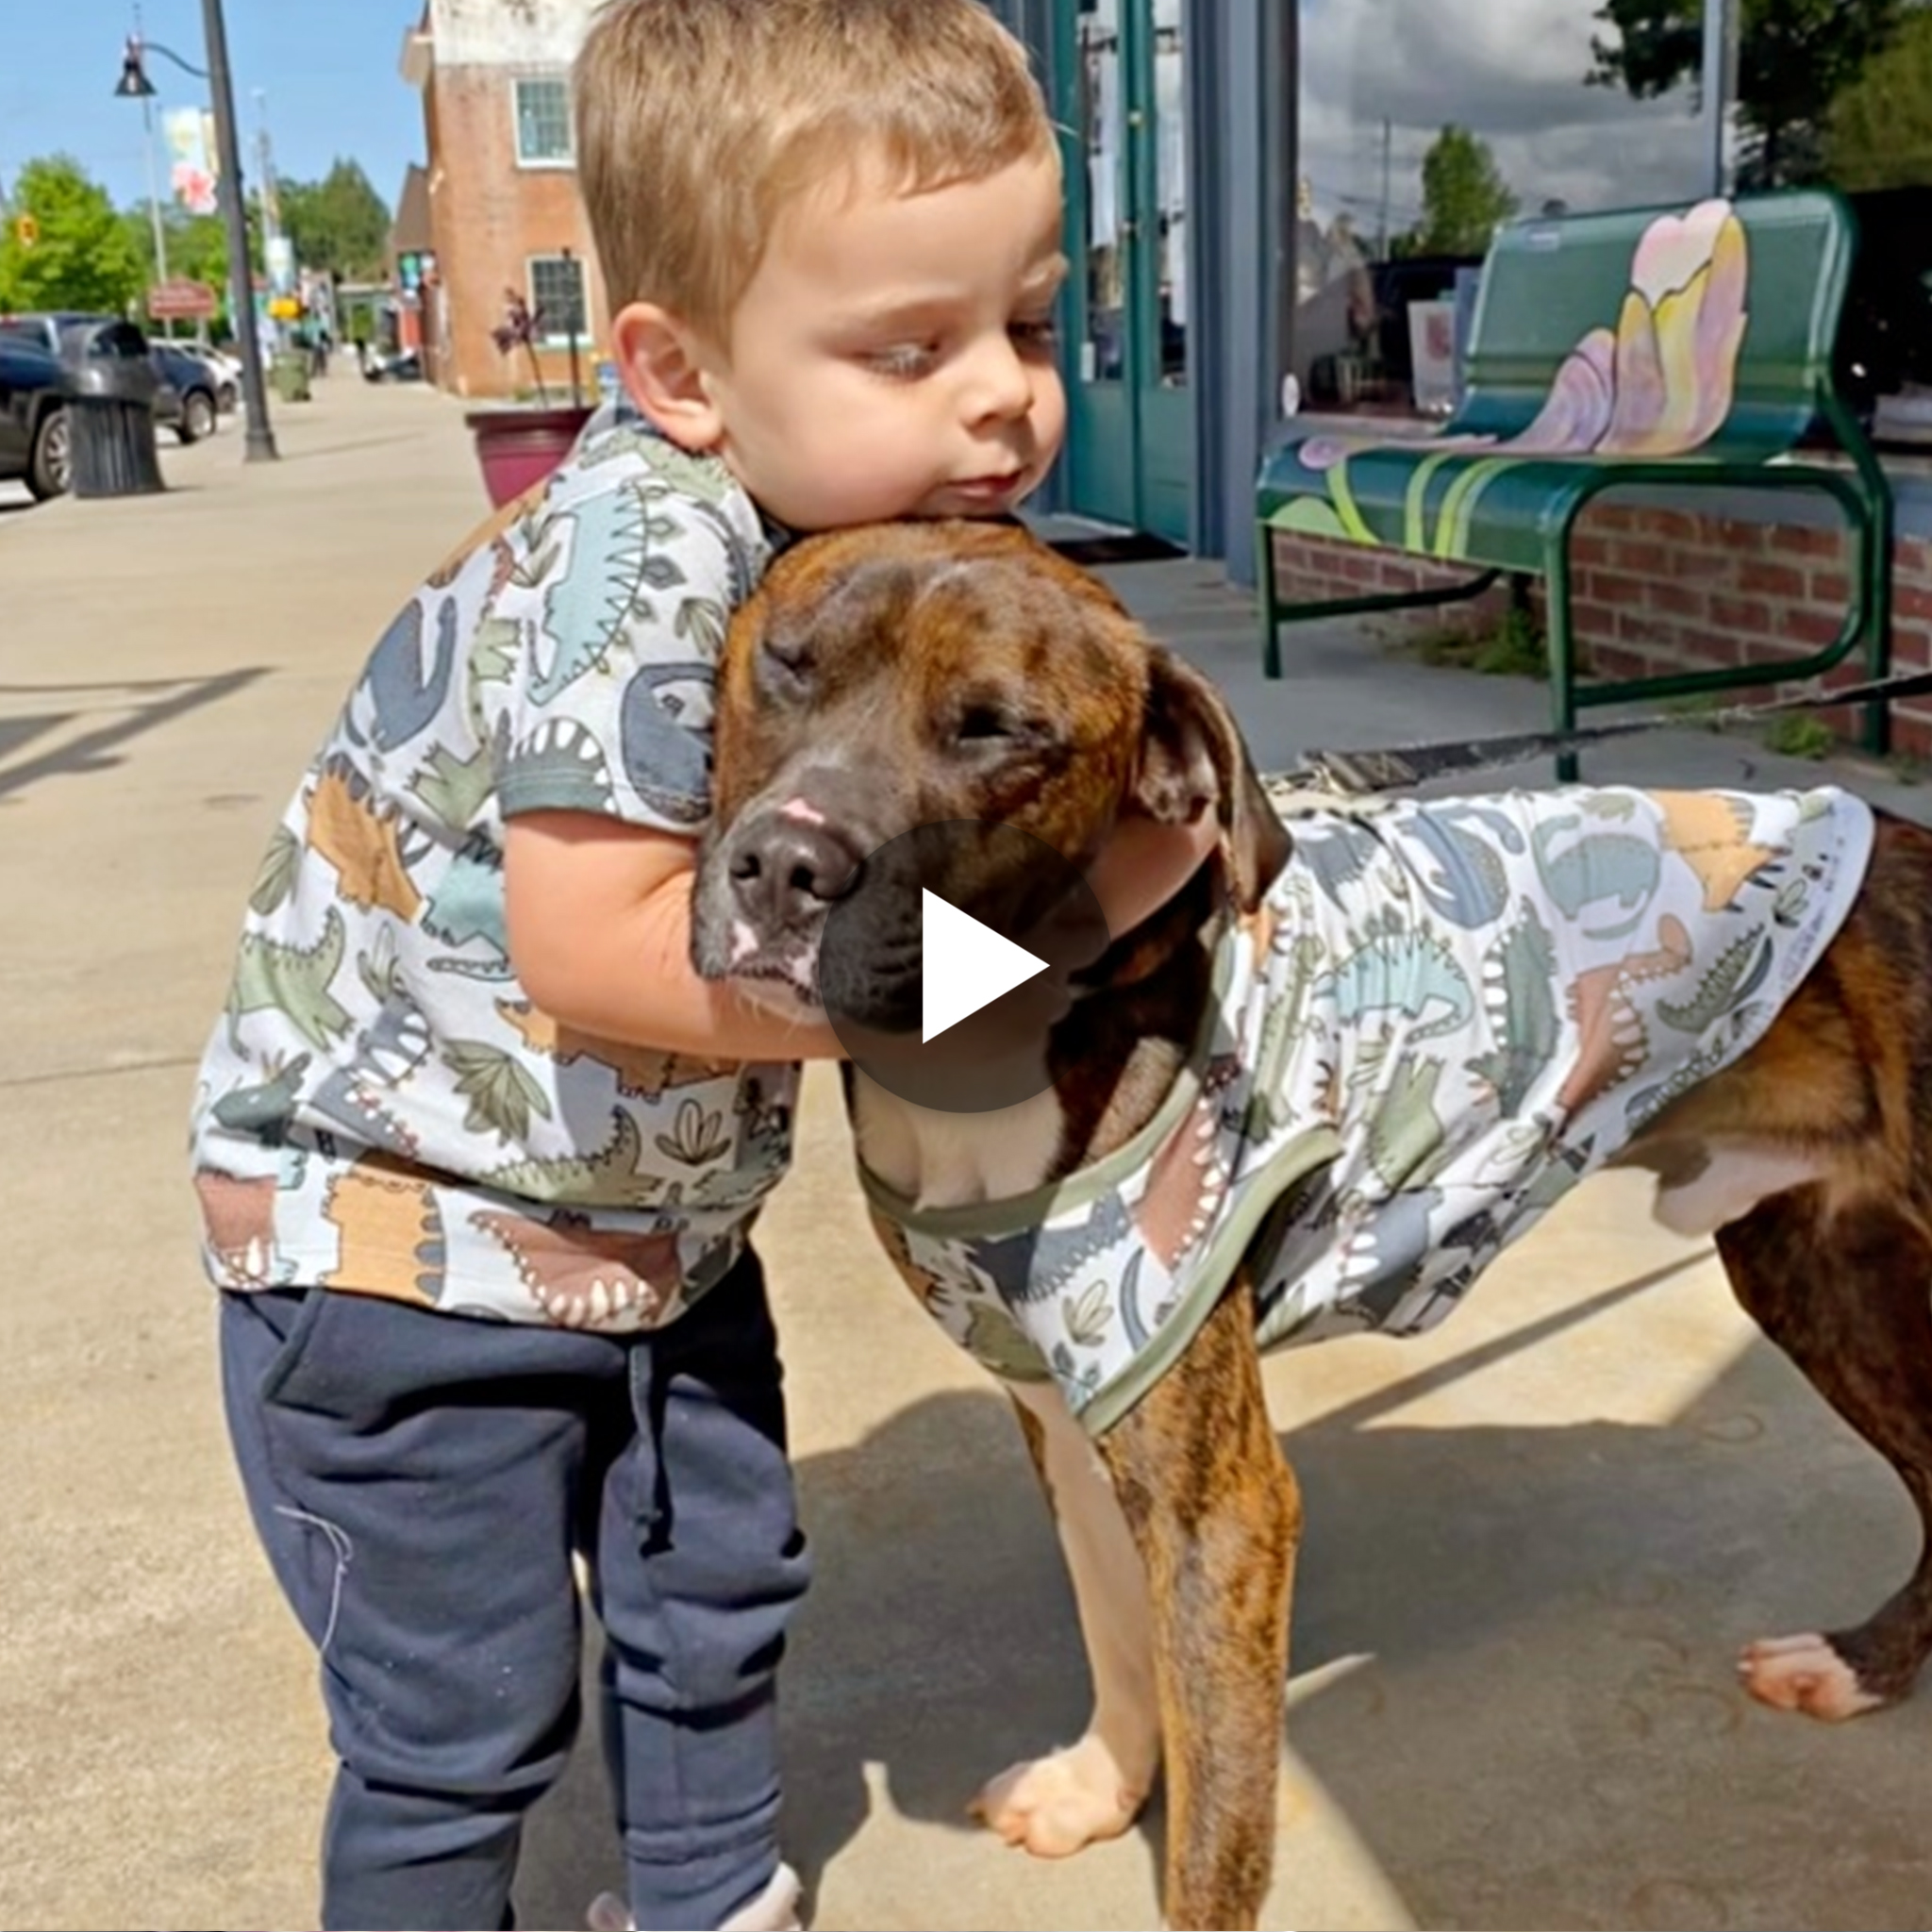 Compelling Cuteness: Mom Strategically Buys Matching T-Shirts for Baby and Dog, Hoping to Convince Dad to Adopt the Four-Legged Friend (VIDEO).